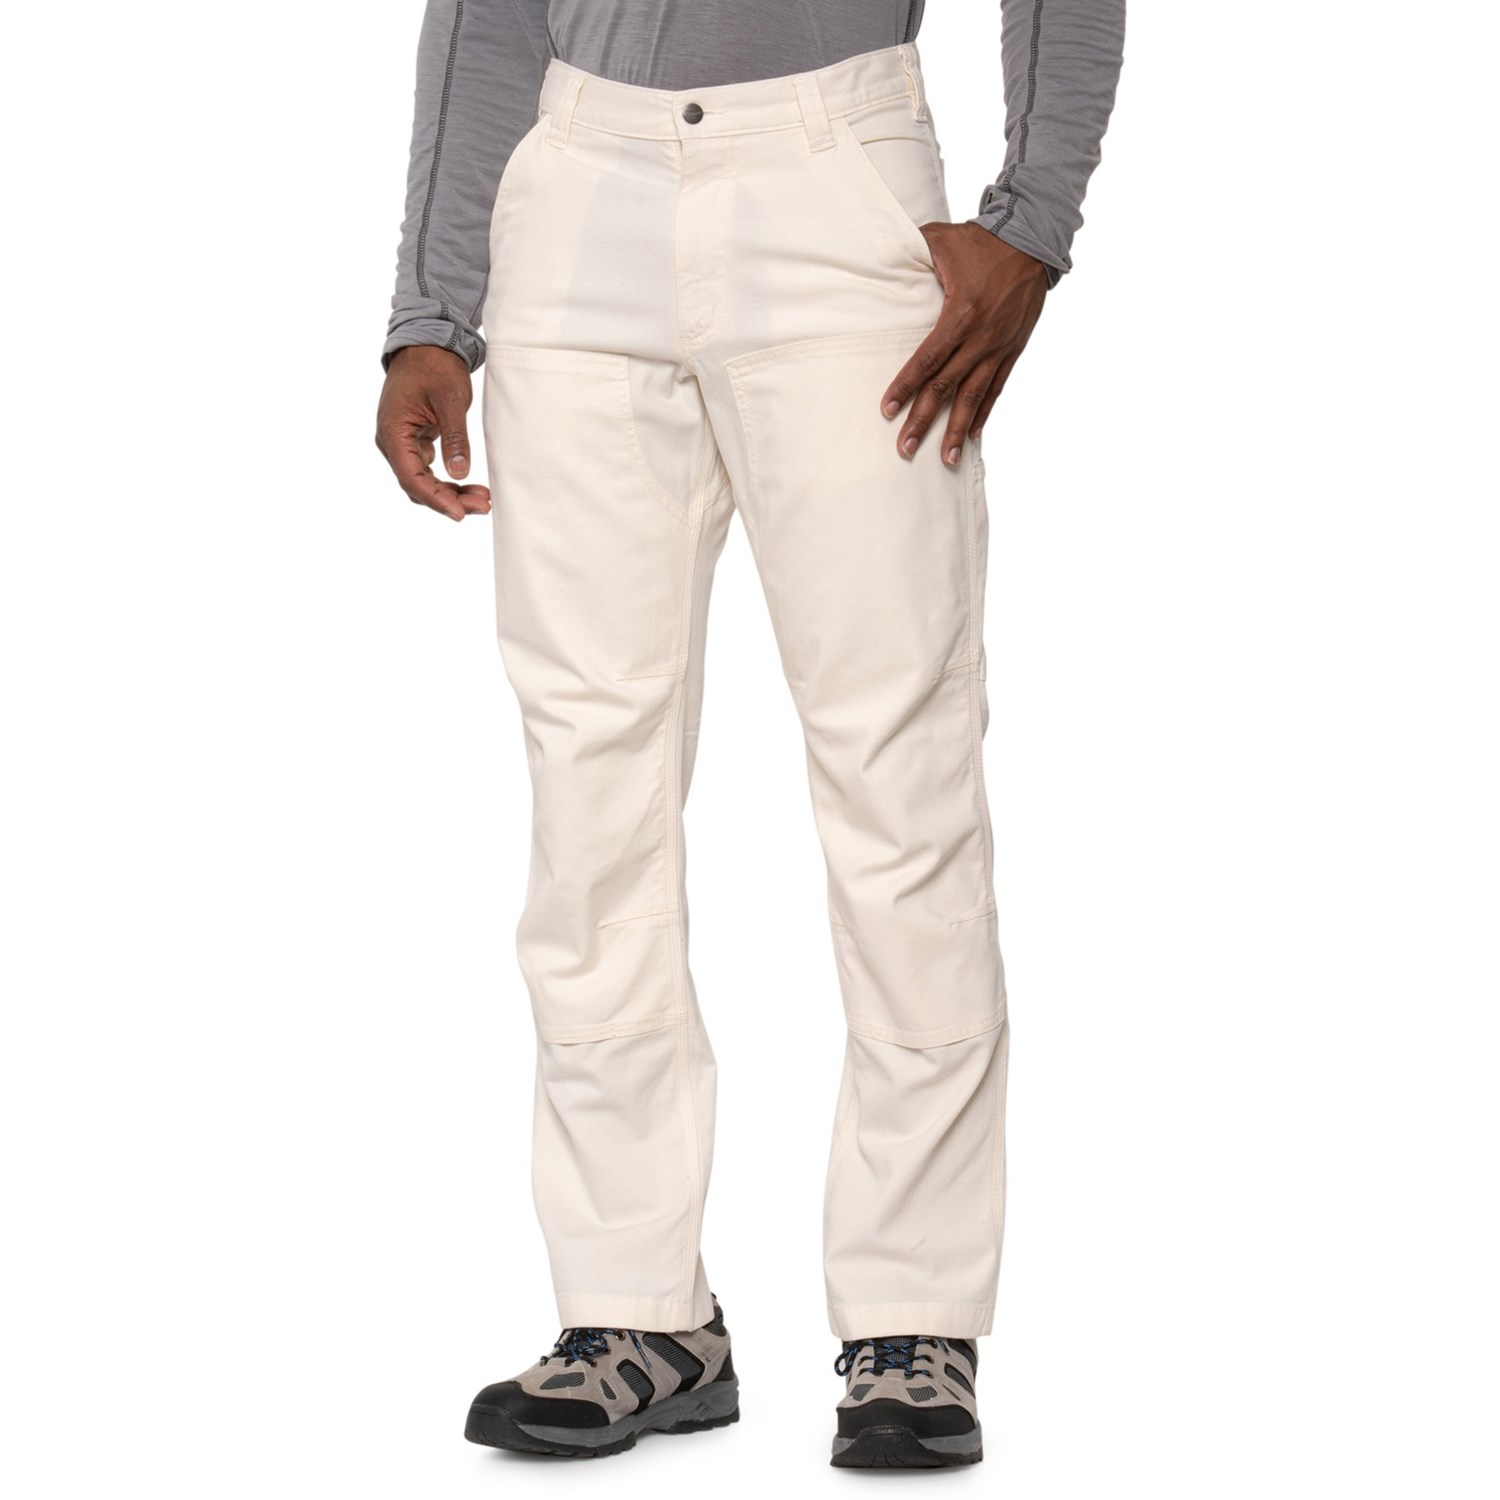 https://i.stpost.com/carhartt-102802-rugged-flex-relaxed-fit-canvas-double-front-utility-work-pants-in-natural~p~1jpya_01~1500.2.jpg